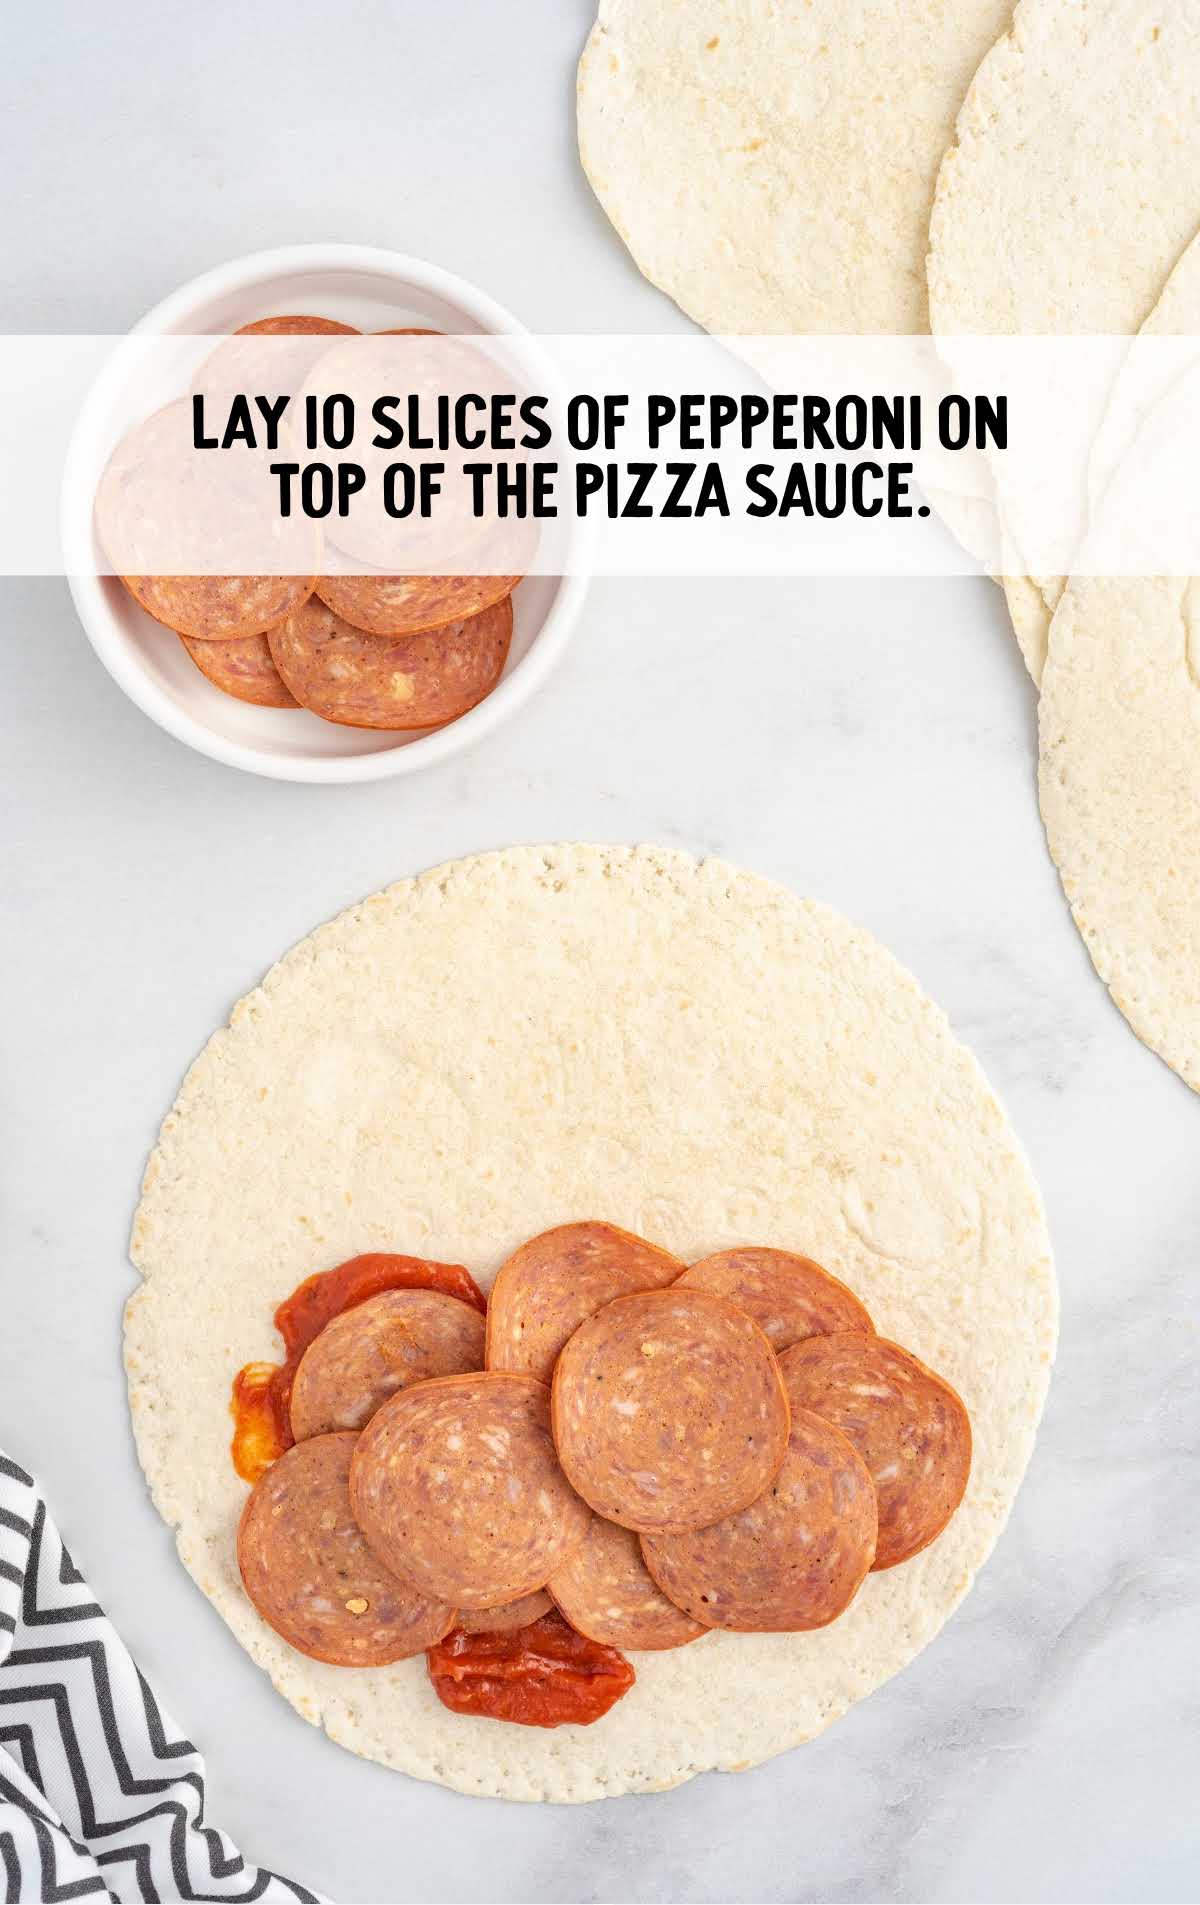 10 slices of pepperoni laid on top of the pizza sauce